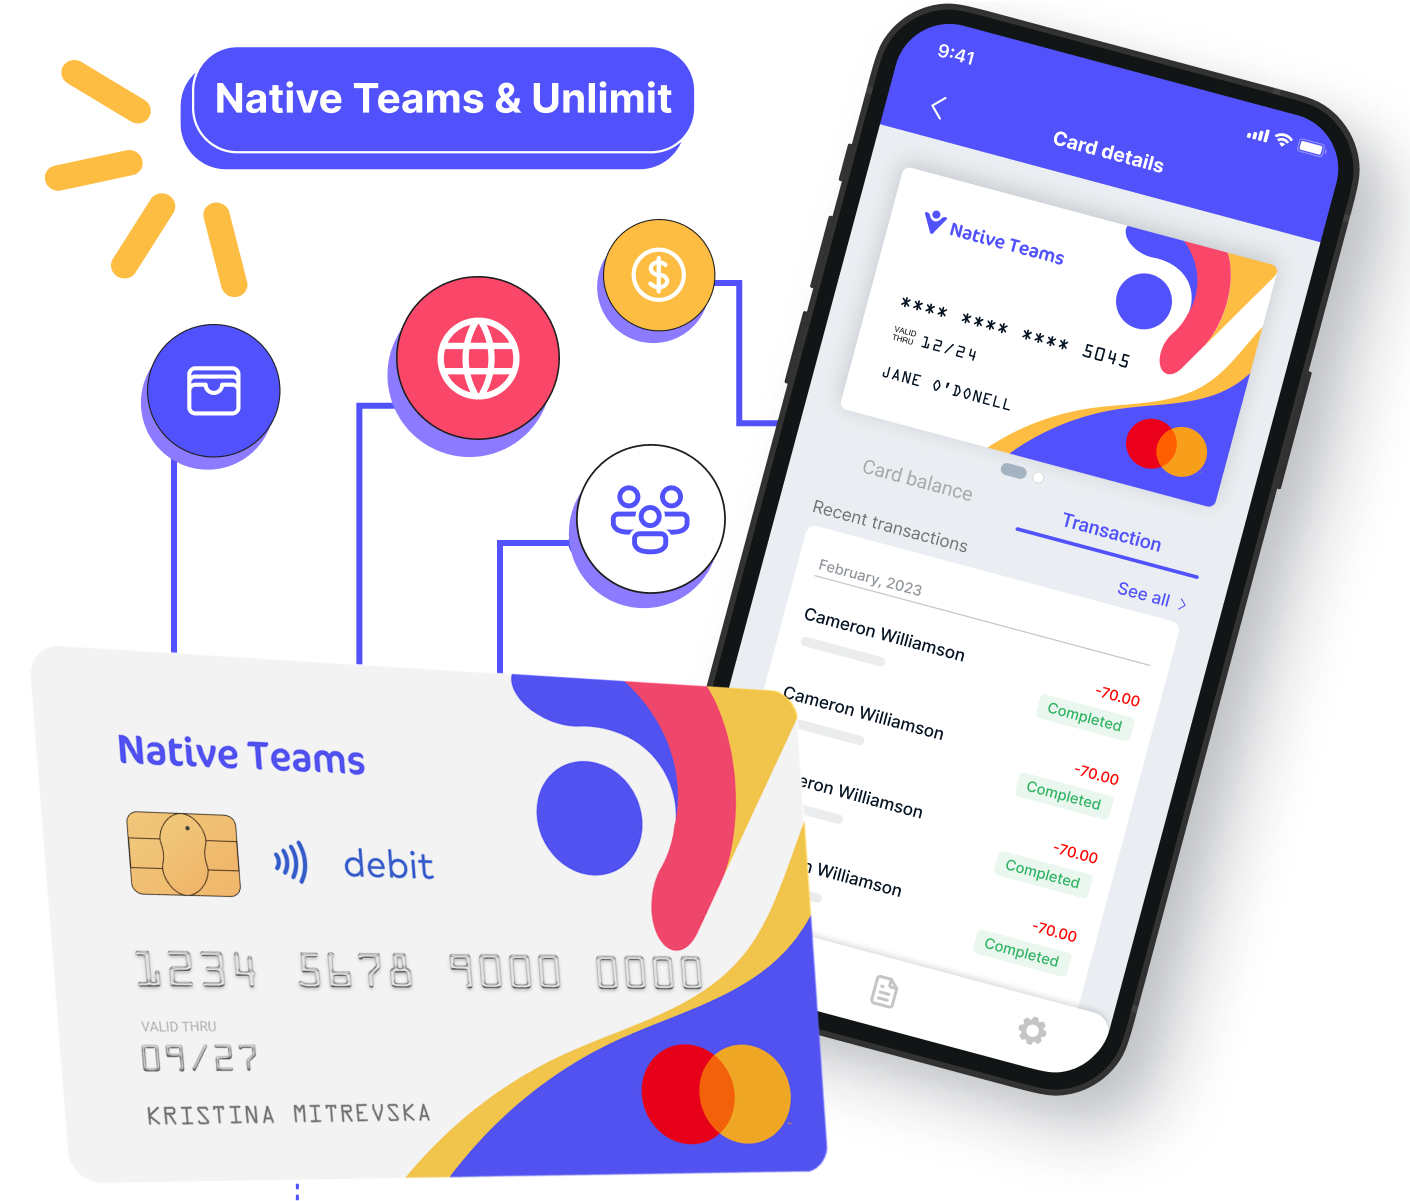 Native Teams | How does it work?